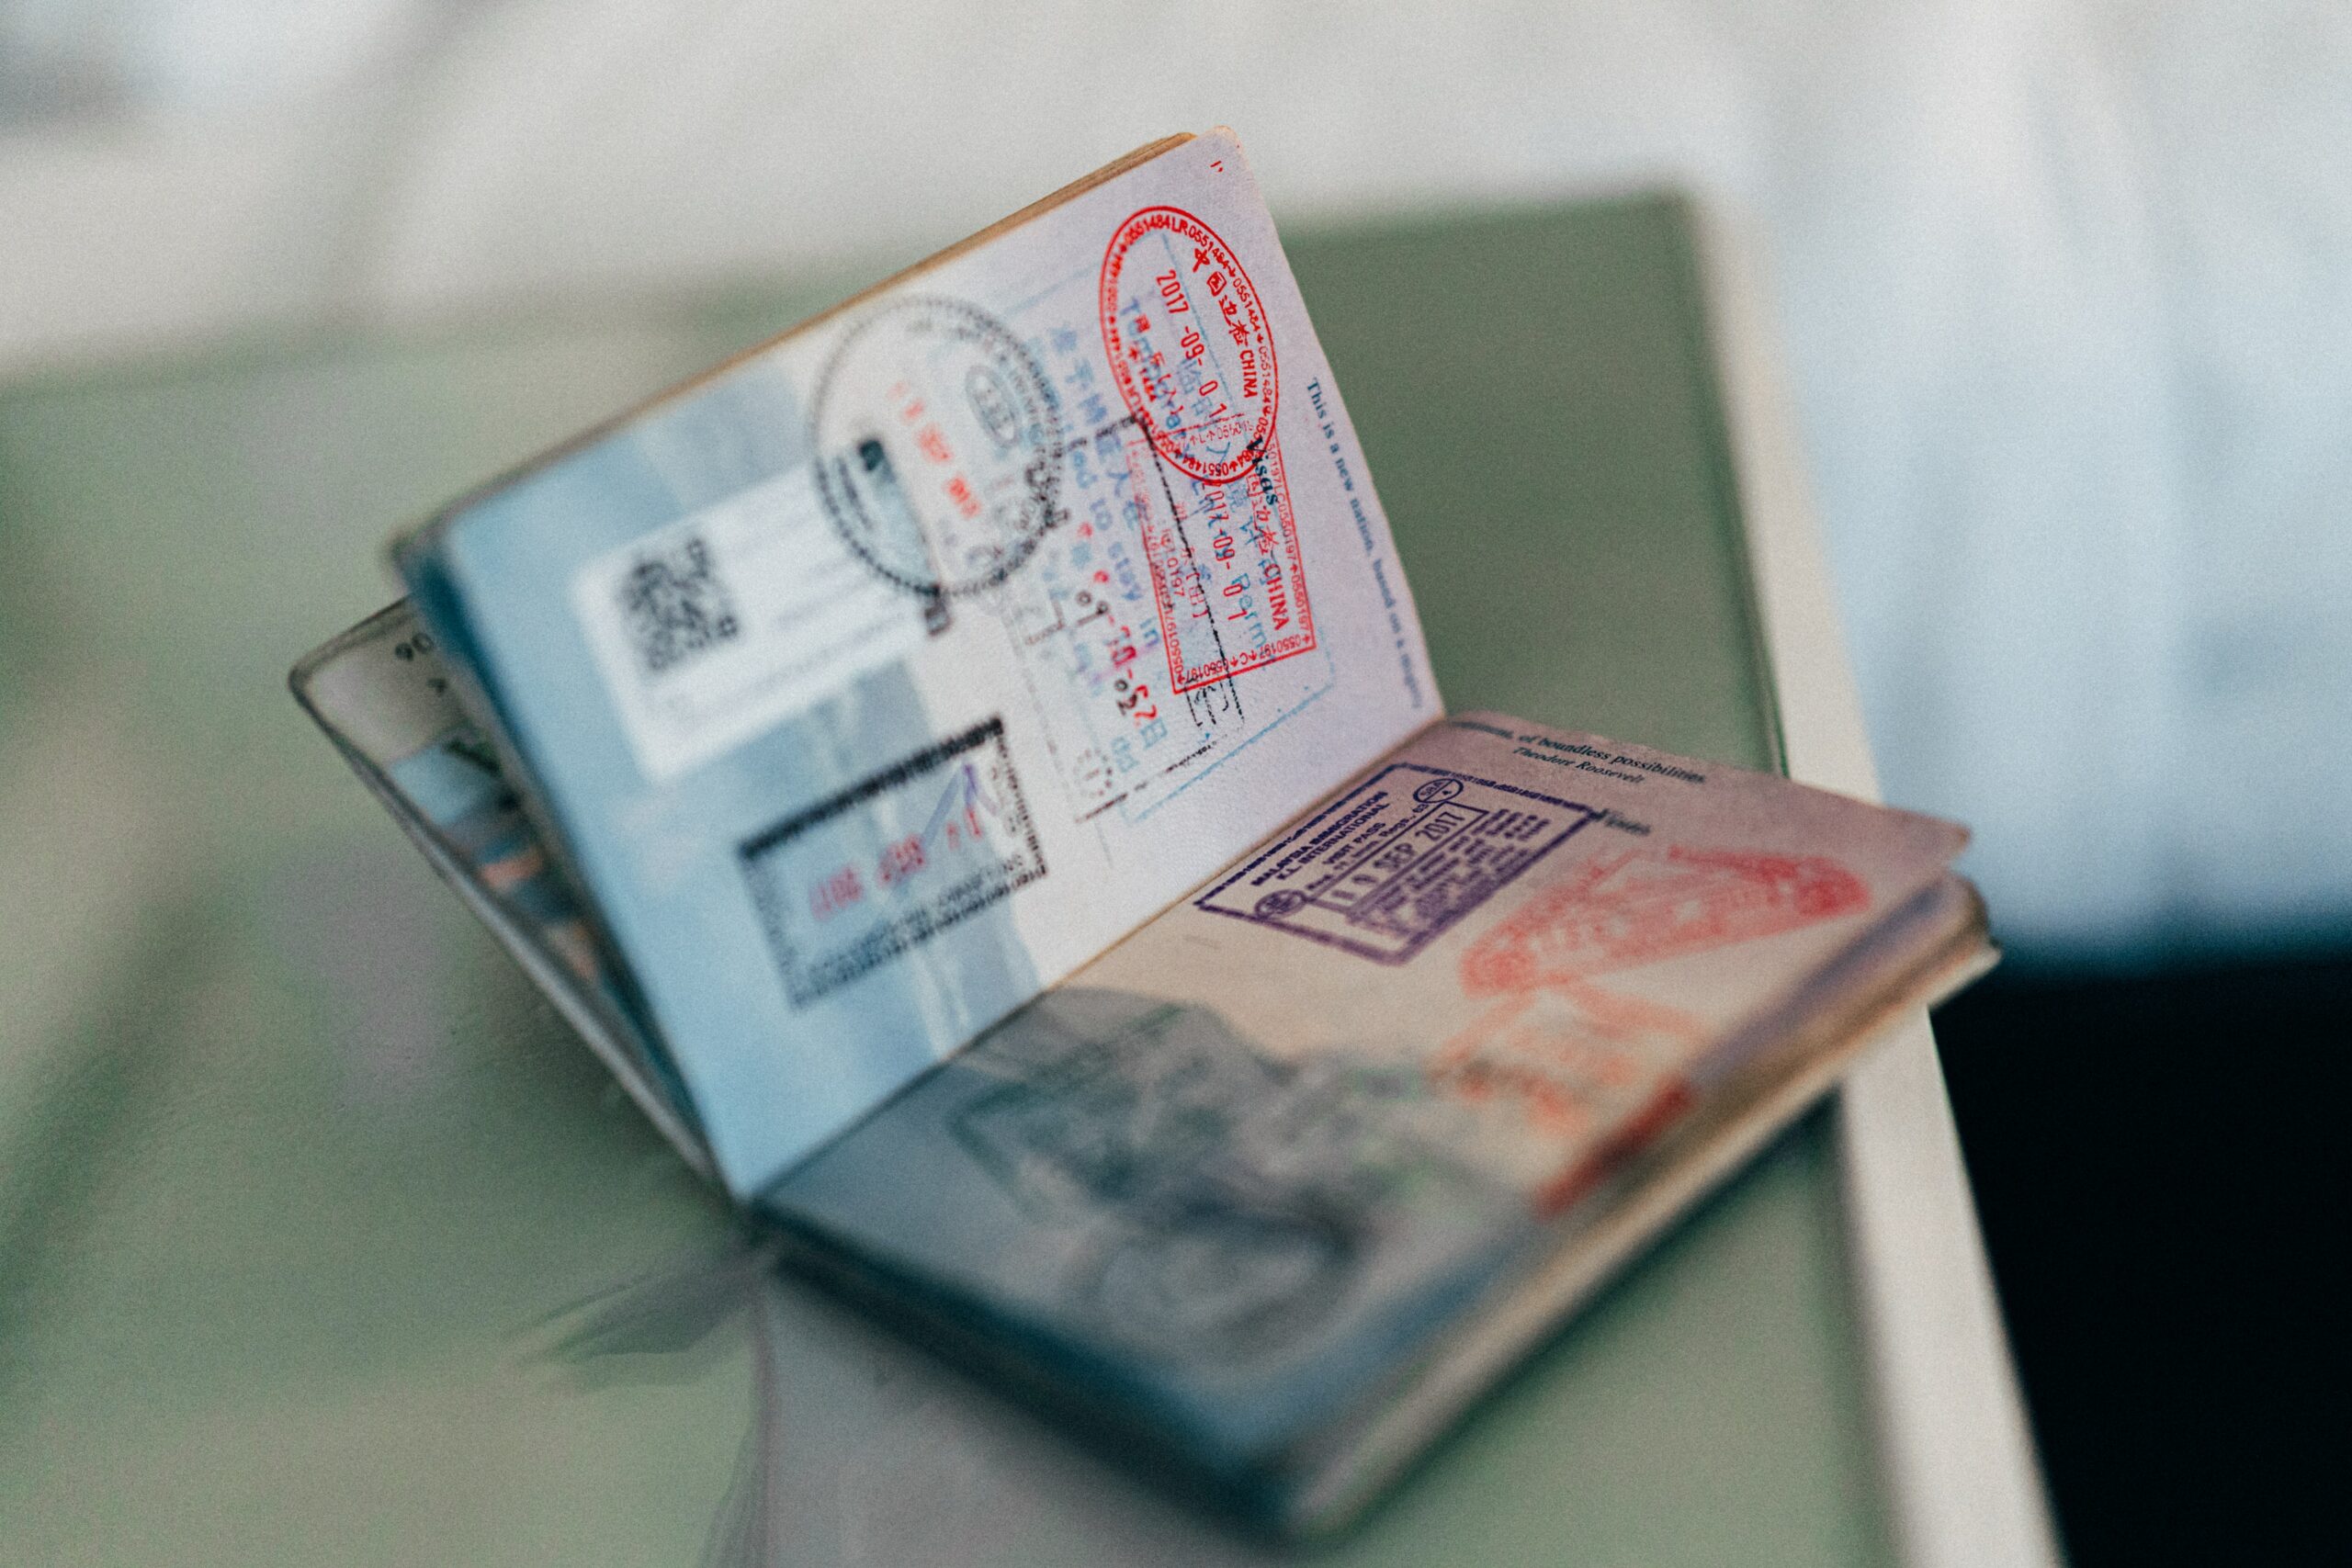 Passport with stamps open on a table